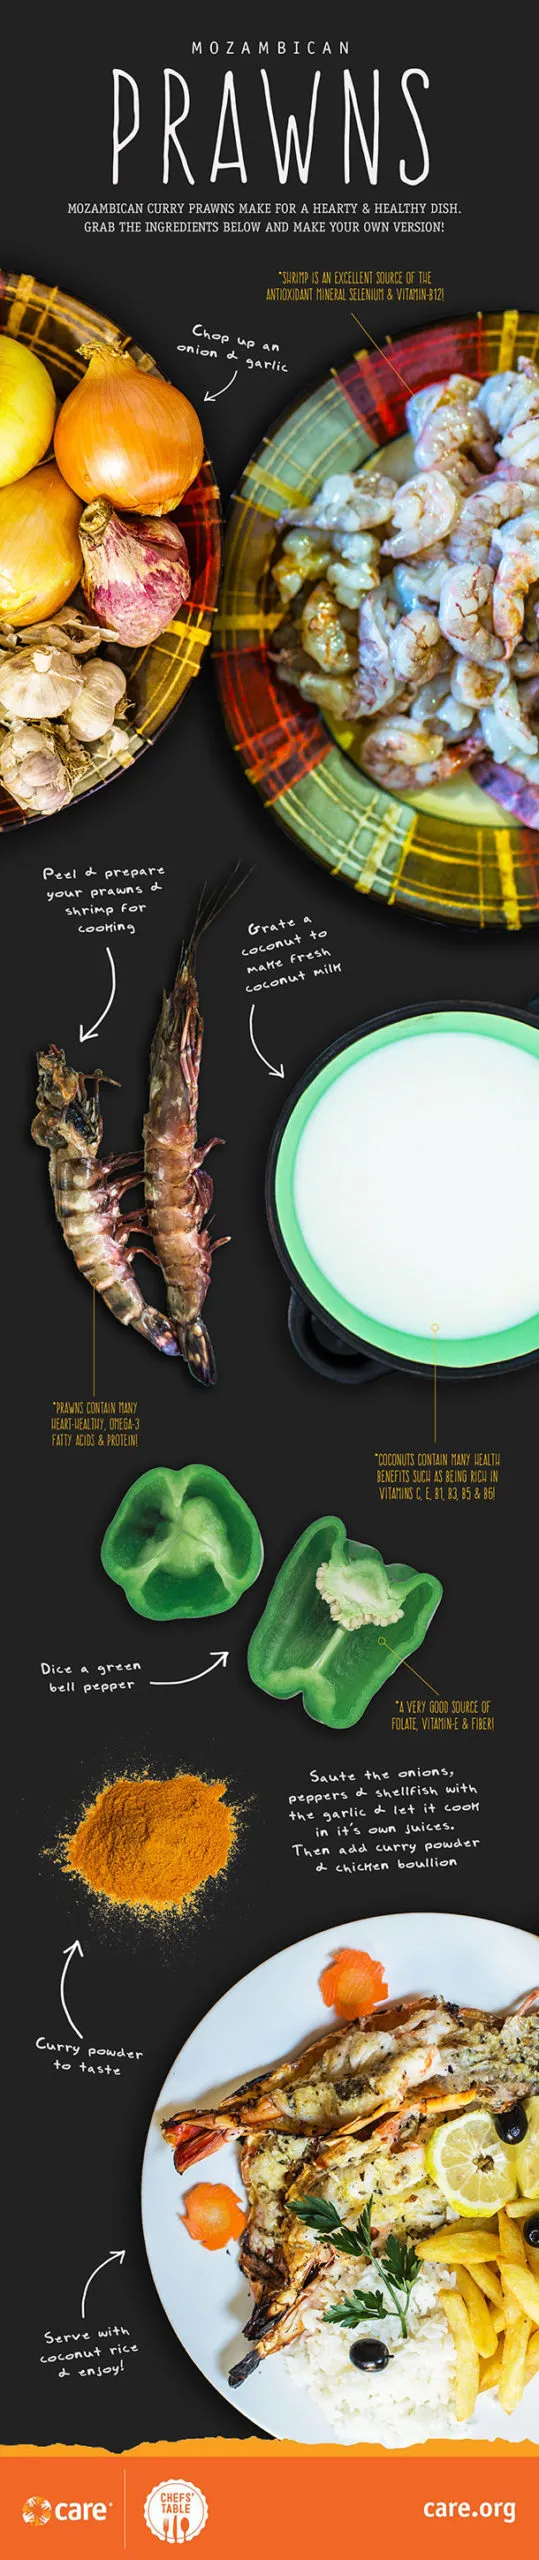 A graphic featuring ingredients and instructions to make Mozambican curry prawns.